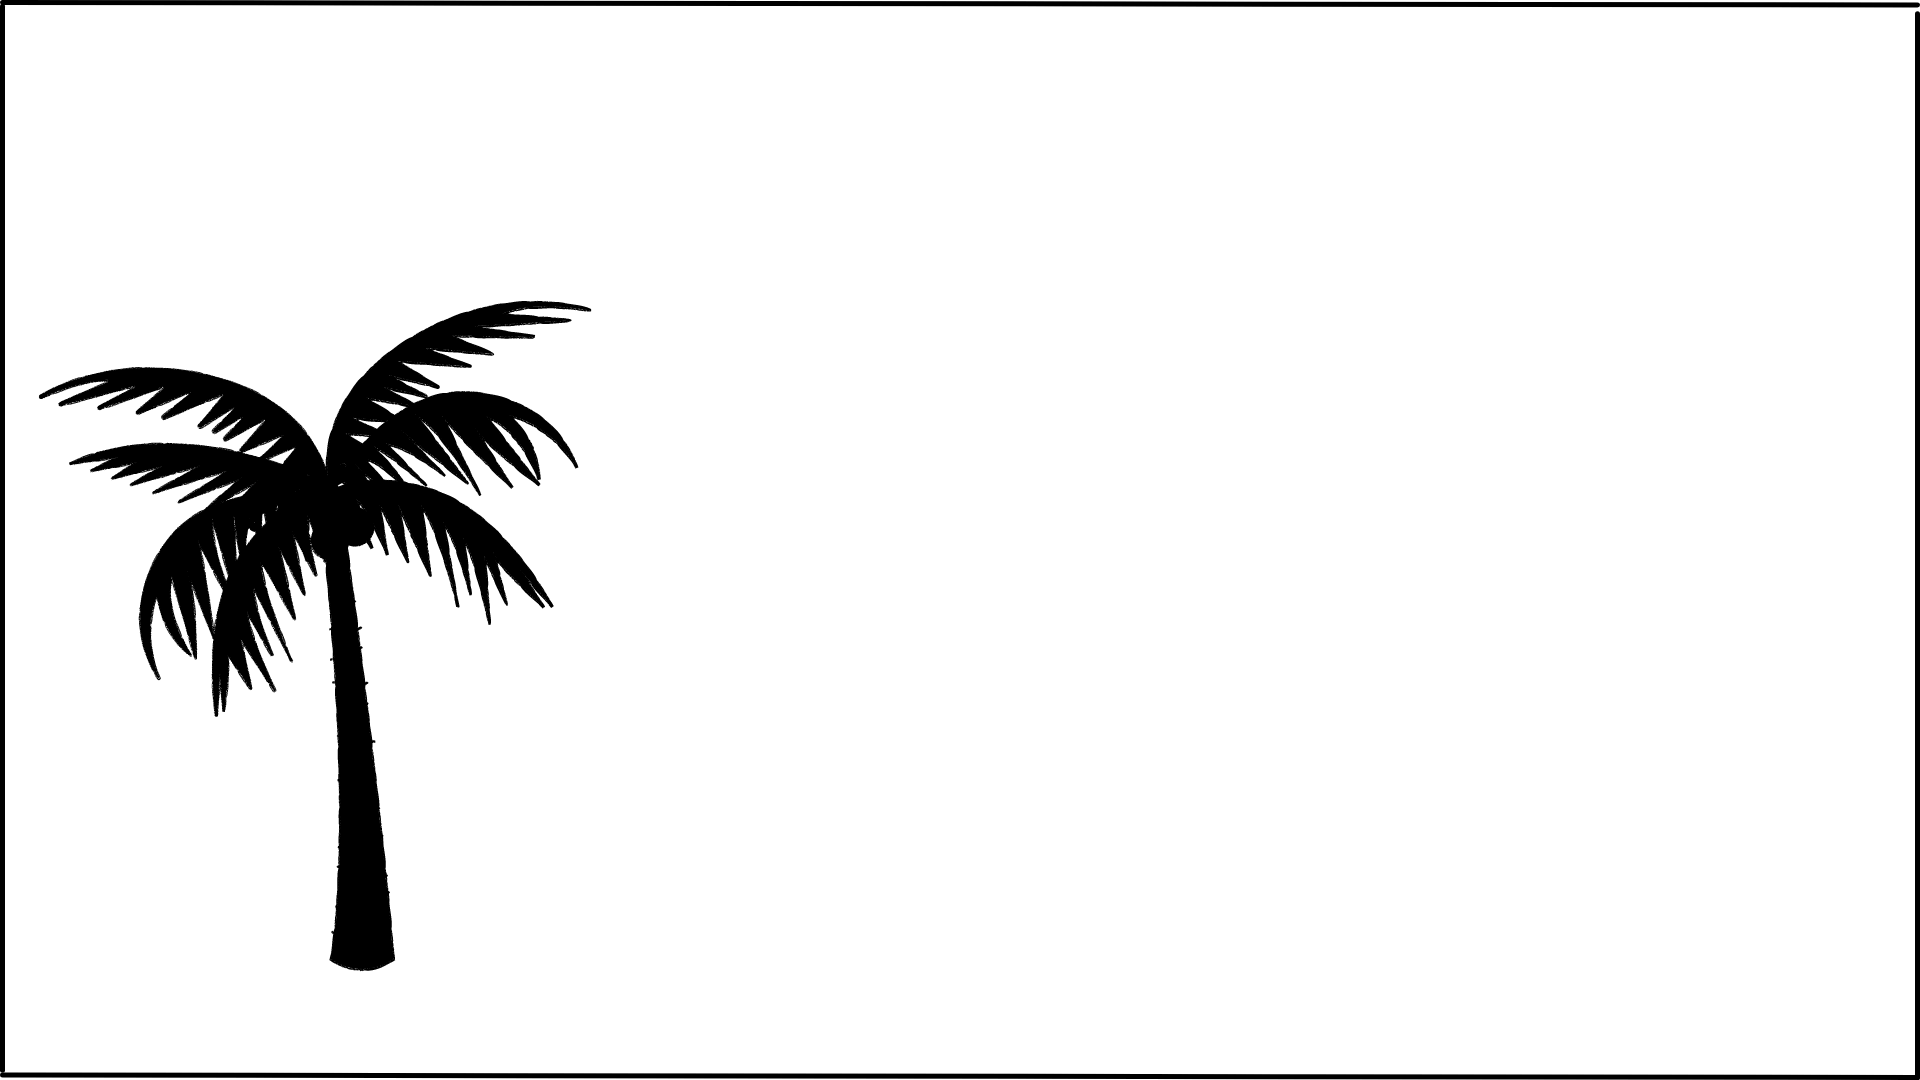 coconut-tree-proportion-symmetry-negative-space-white-space-active-passive-space